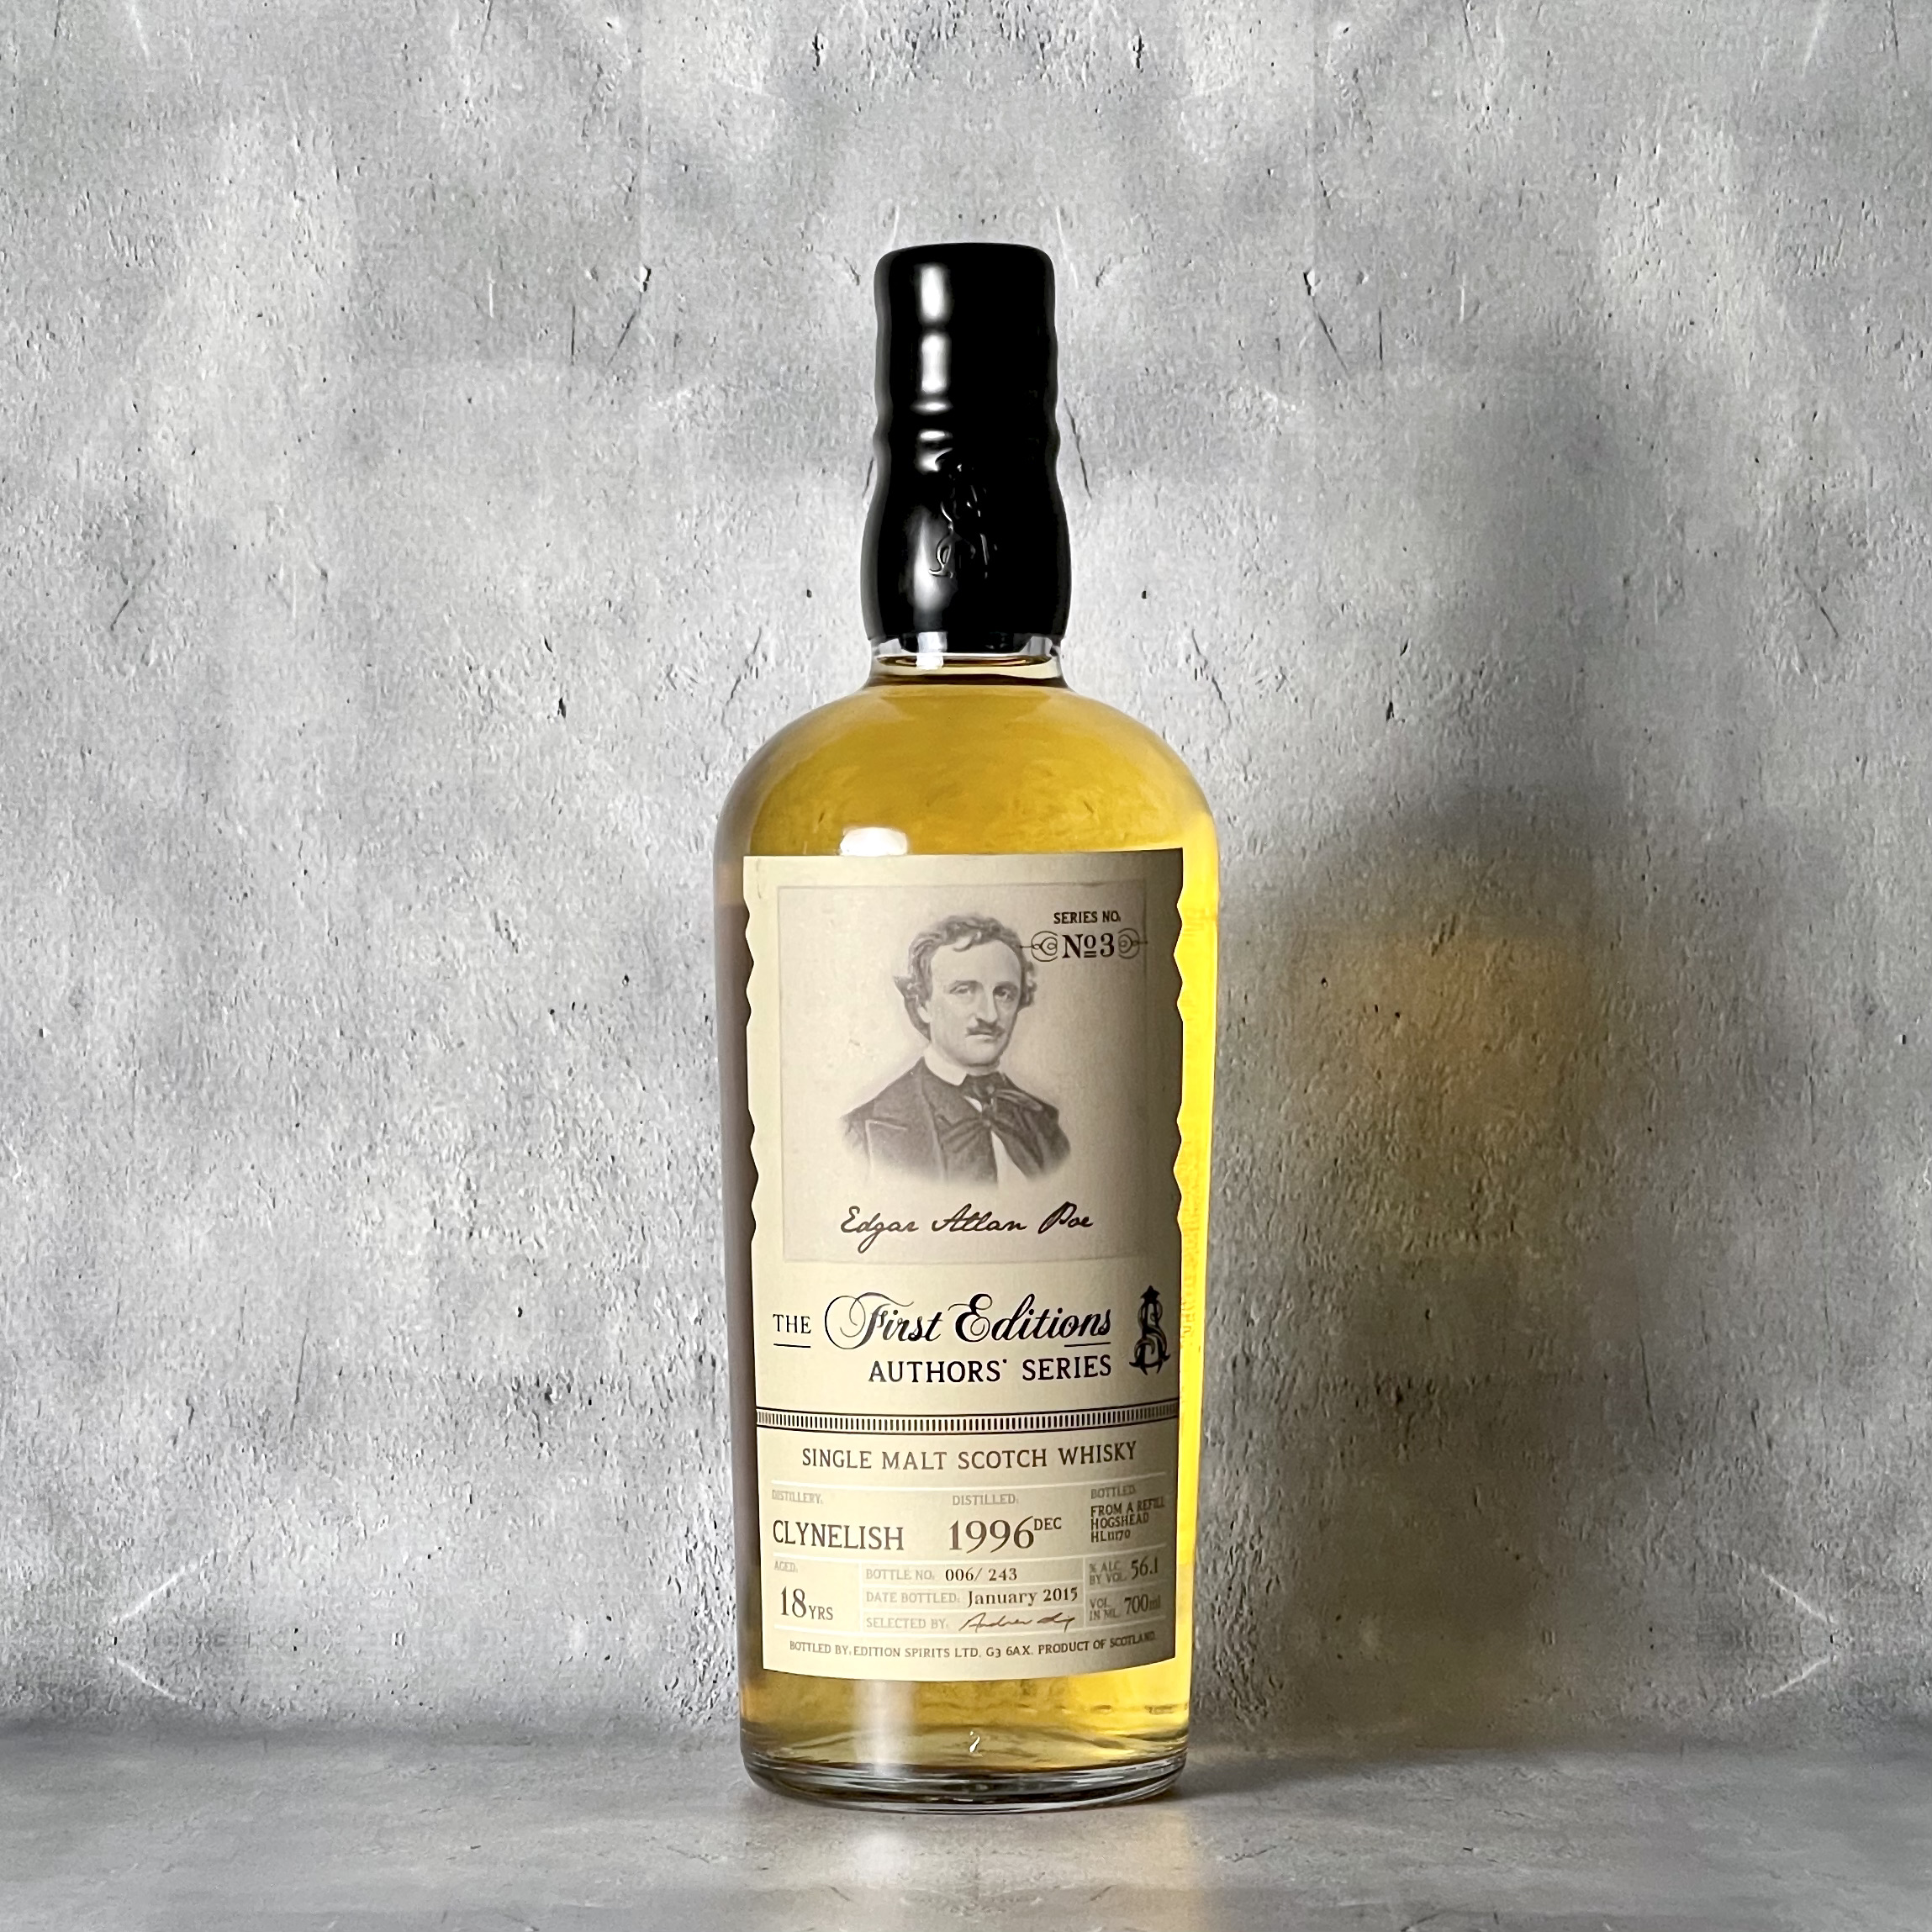 WHISKY LOVERS ONLINESHOP / クライヌリッシュ